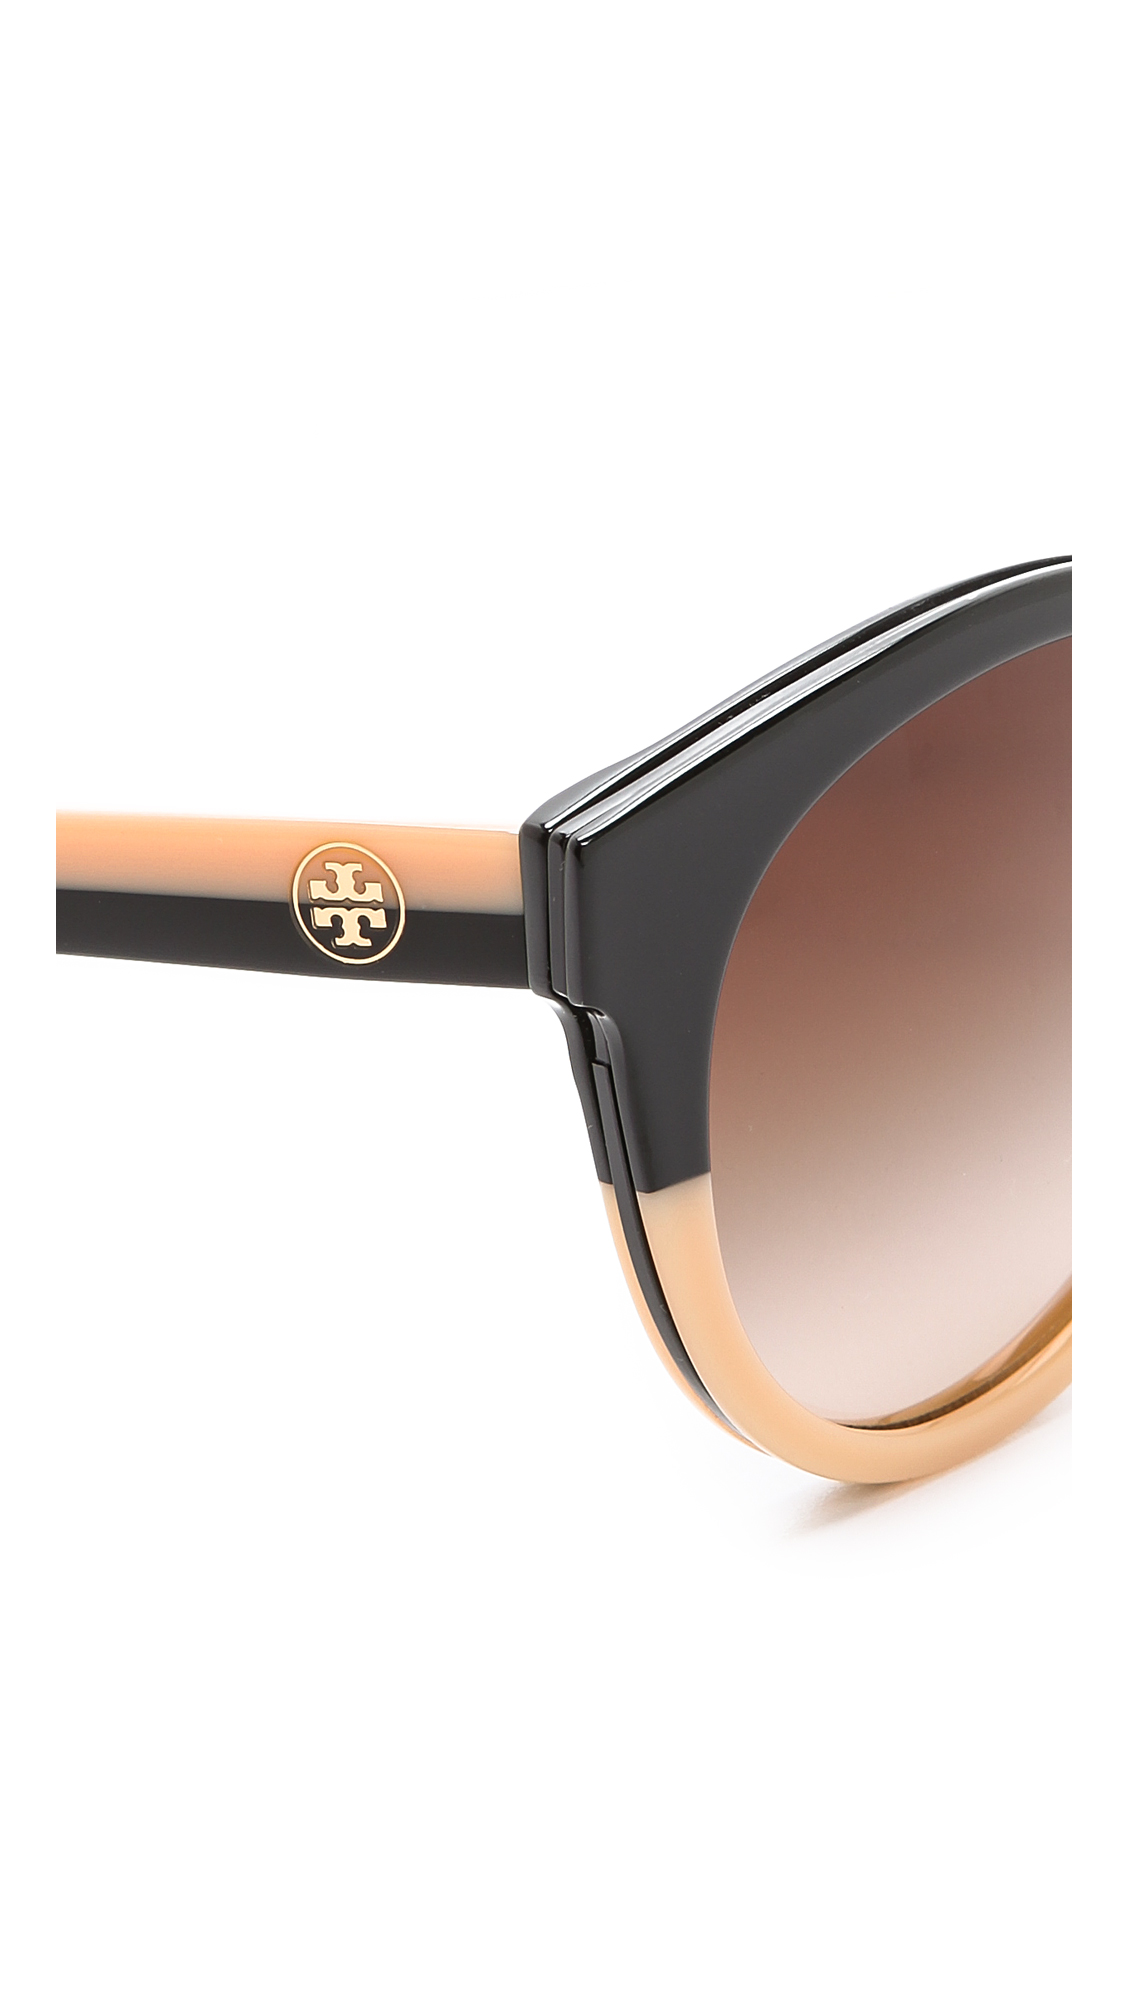 Tory Burch Eclectic Sunglasses in Black - Lyst